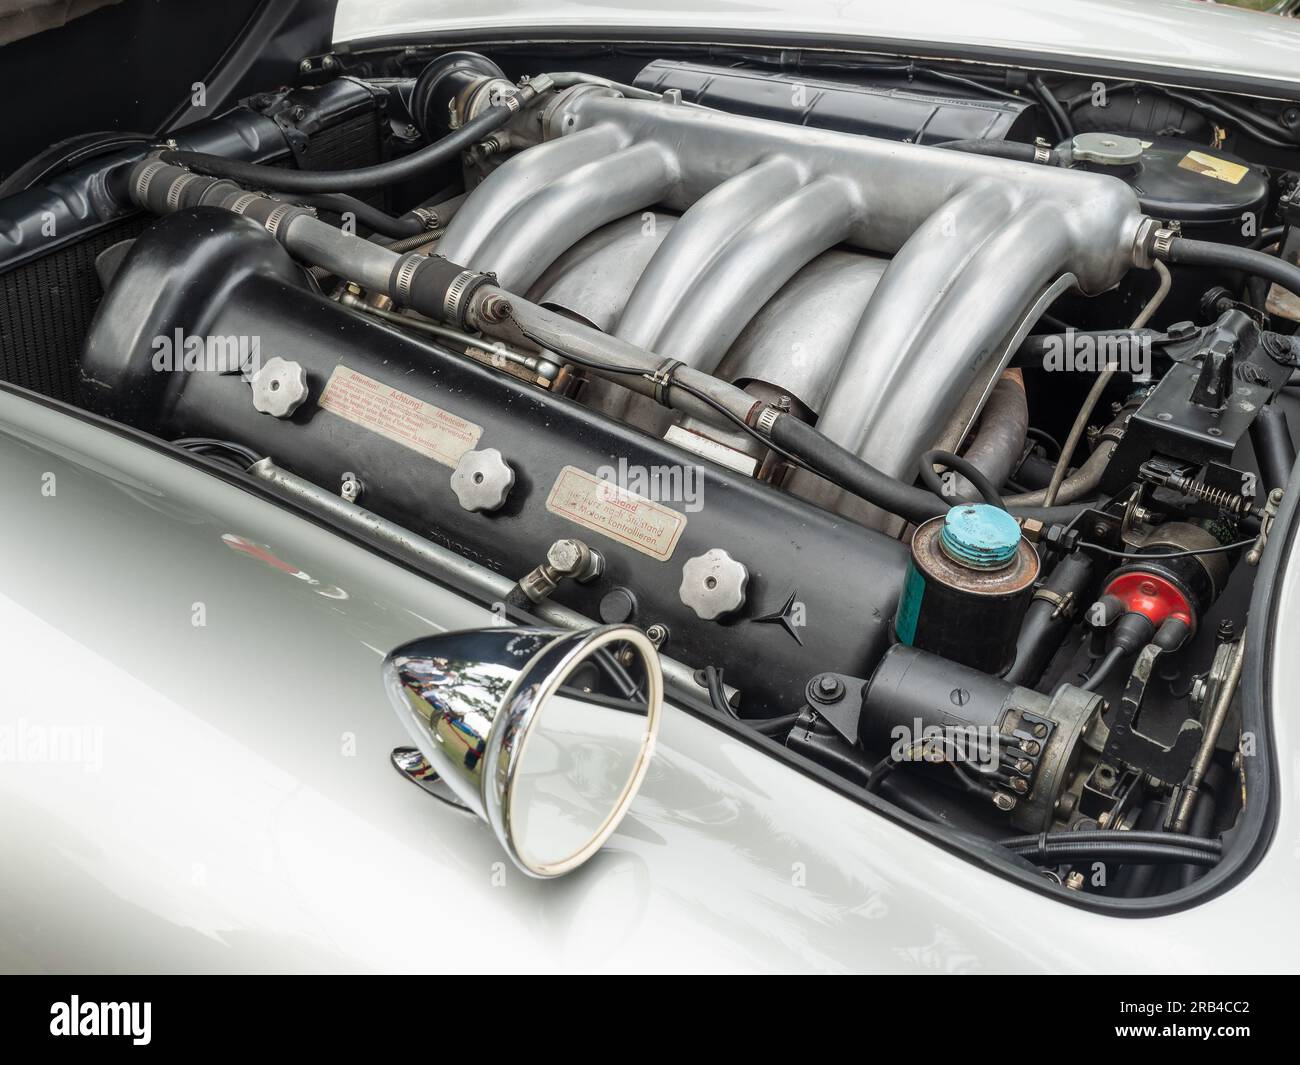 Engine of a 1954 Mercedes Benz 300 SL Gullwing Coupe, manufactured from 1954 to 1957. The 300 SL is one of the most sought after cars from its period. Stock Photo